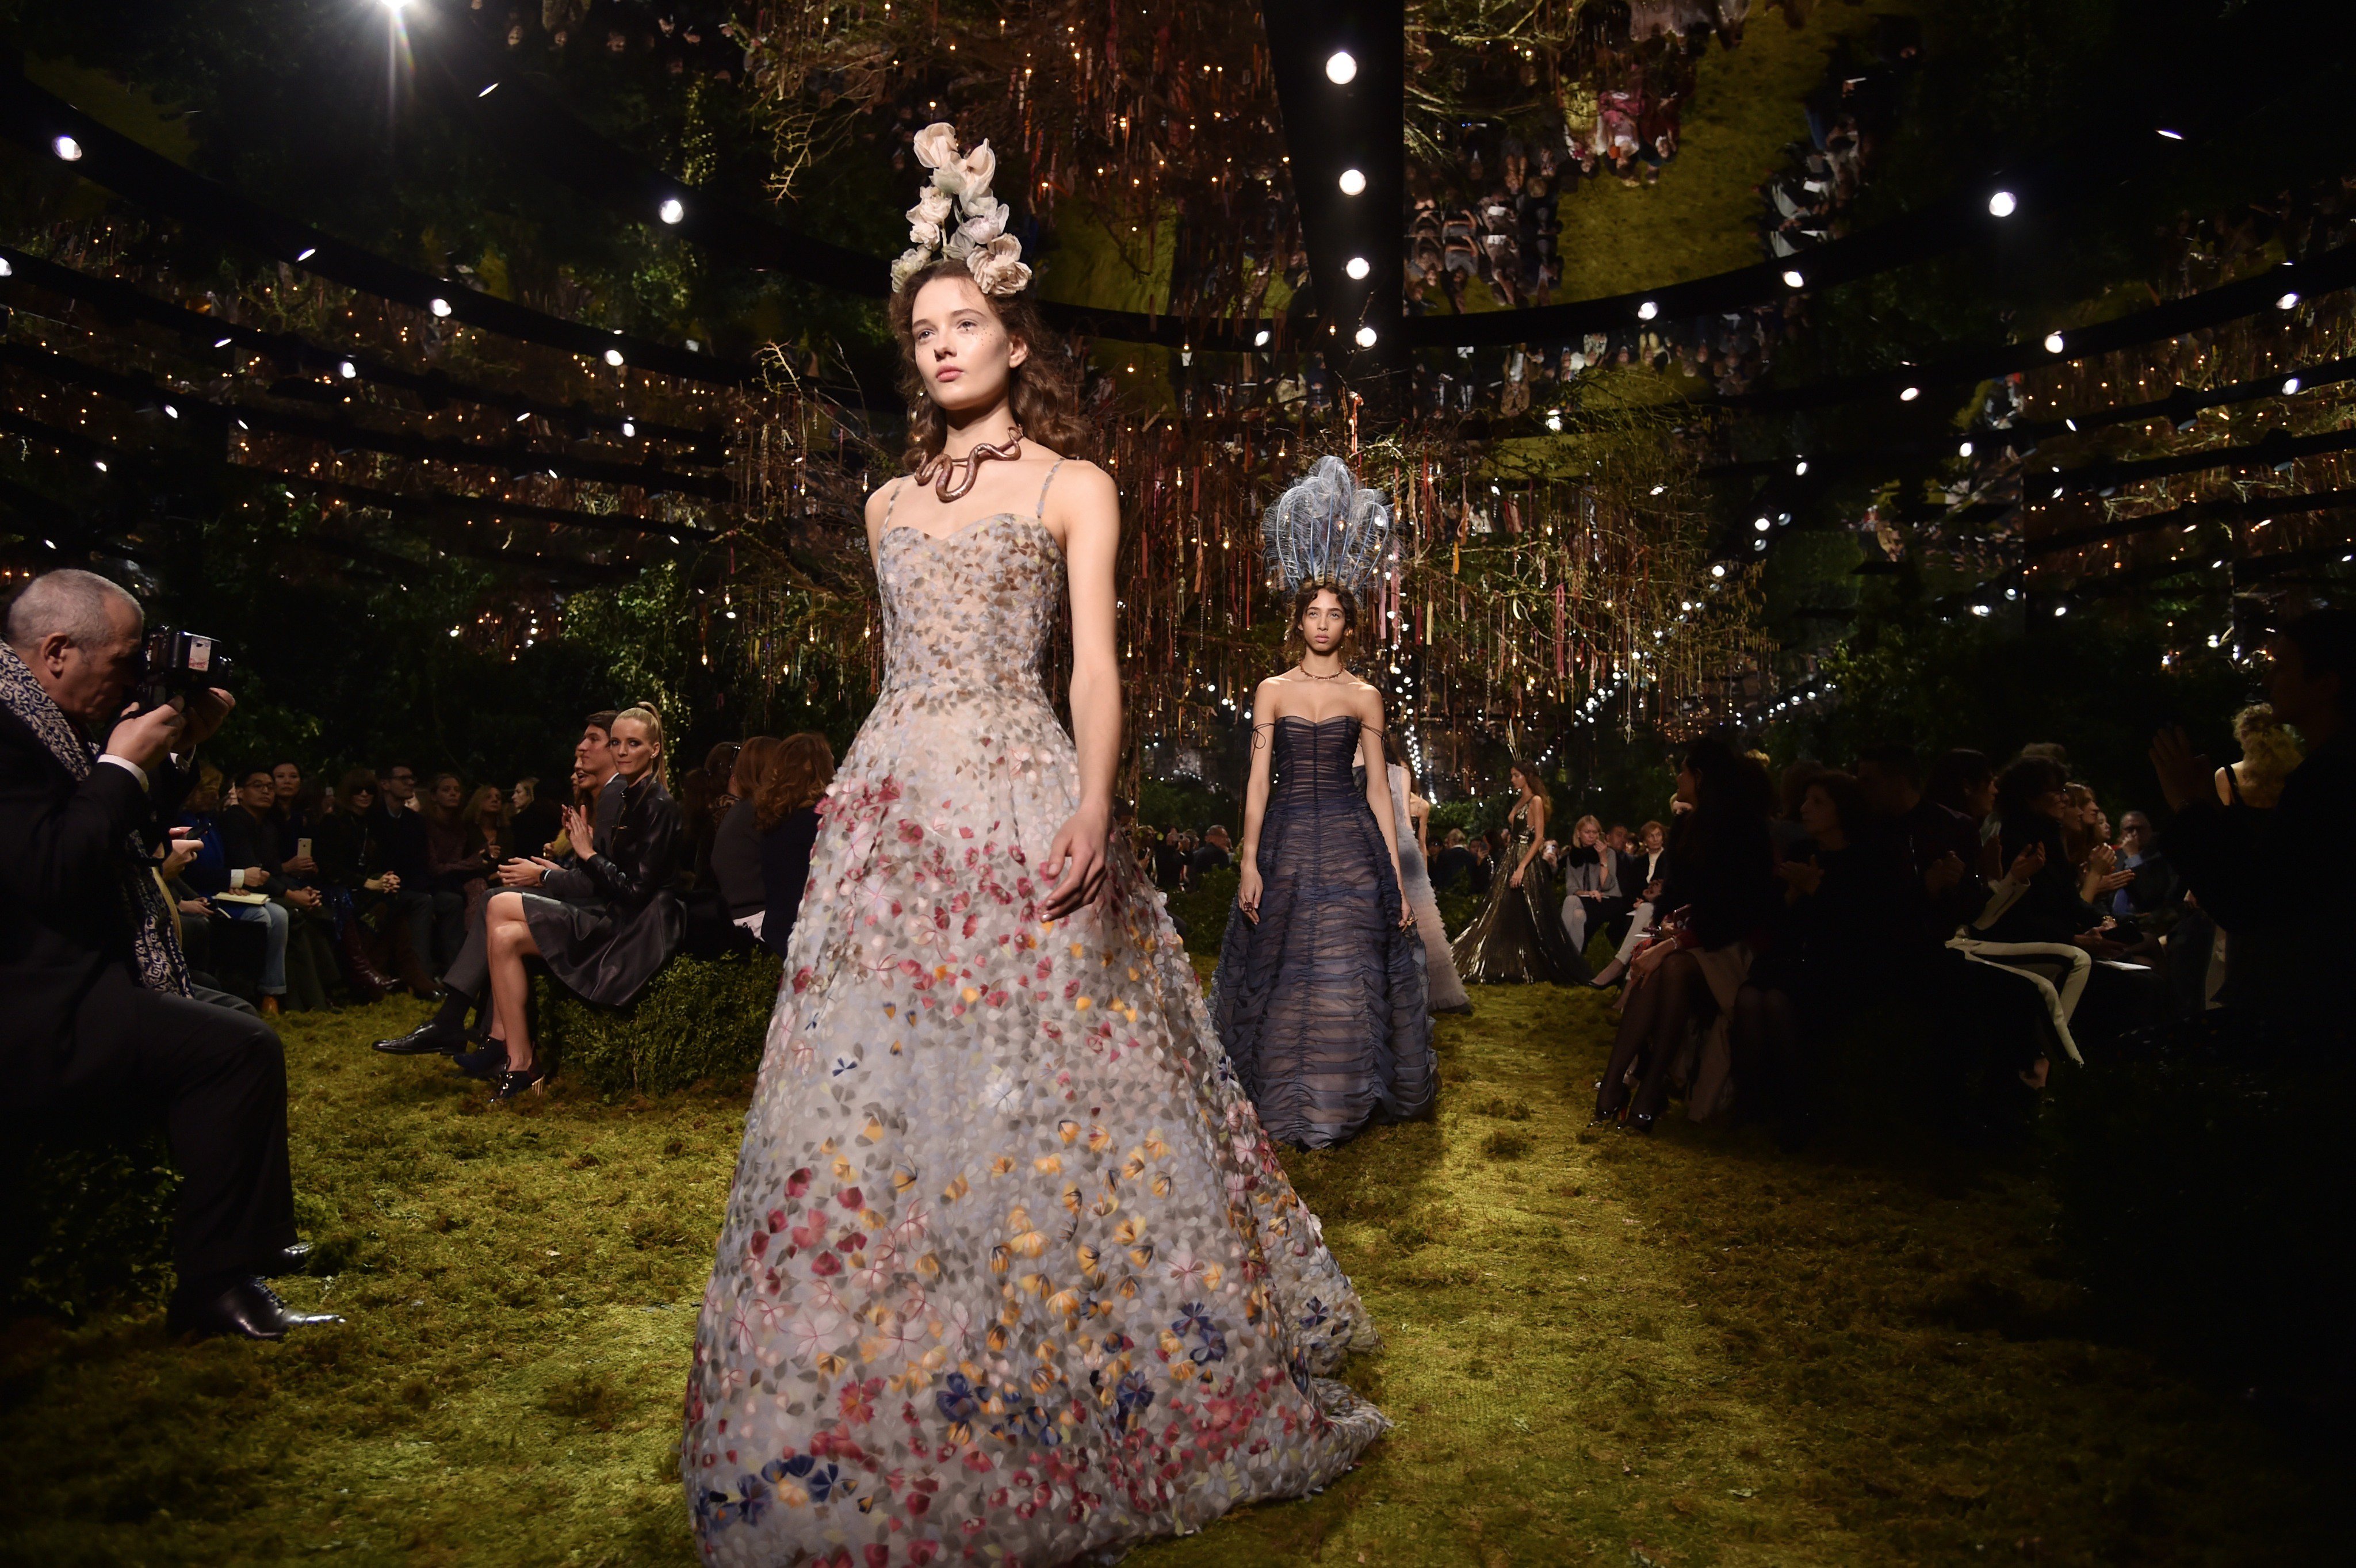 Dior Haute Couture Taps into a Whimsical, Witchy Fairy Tale for